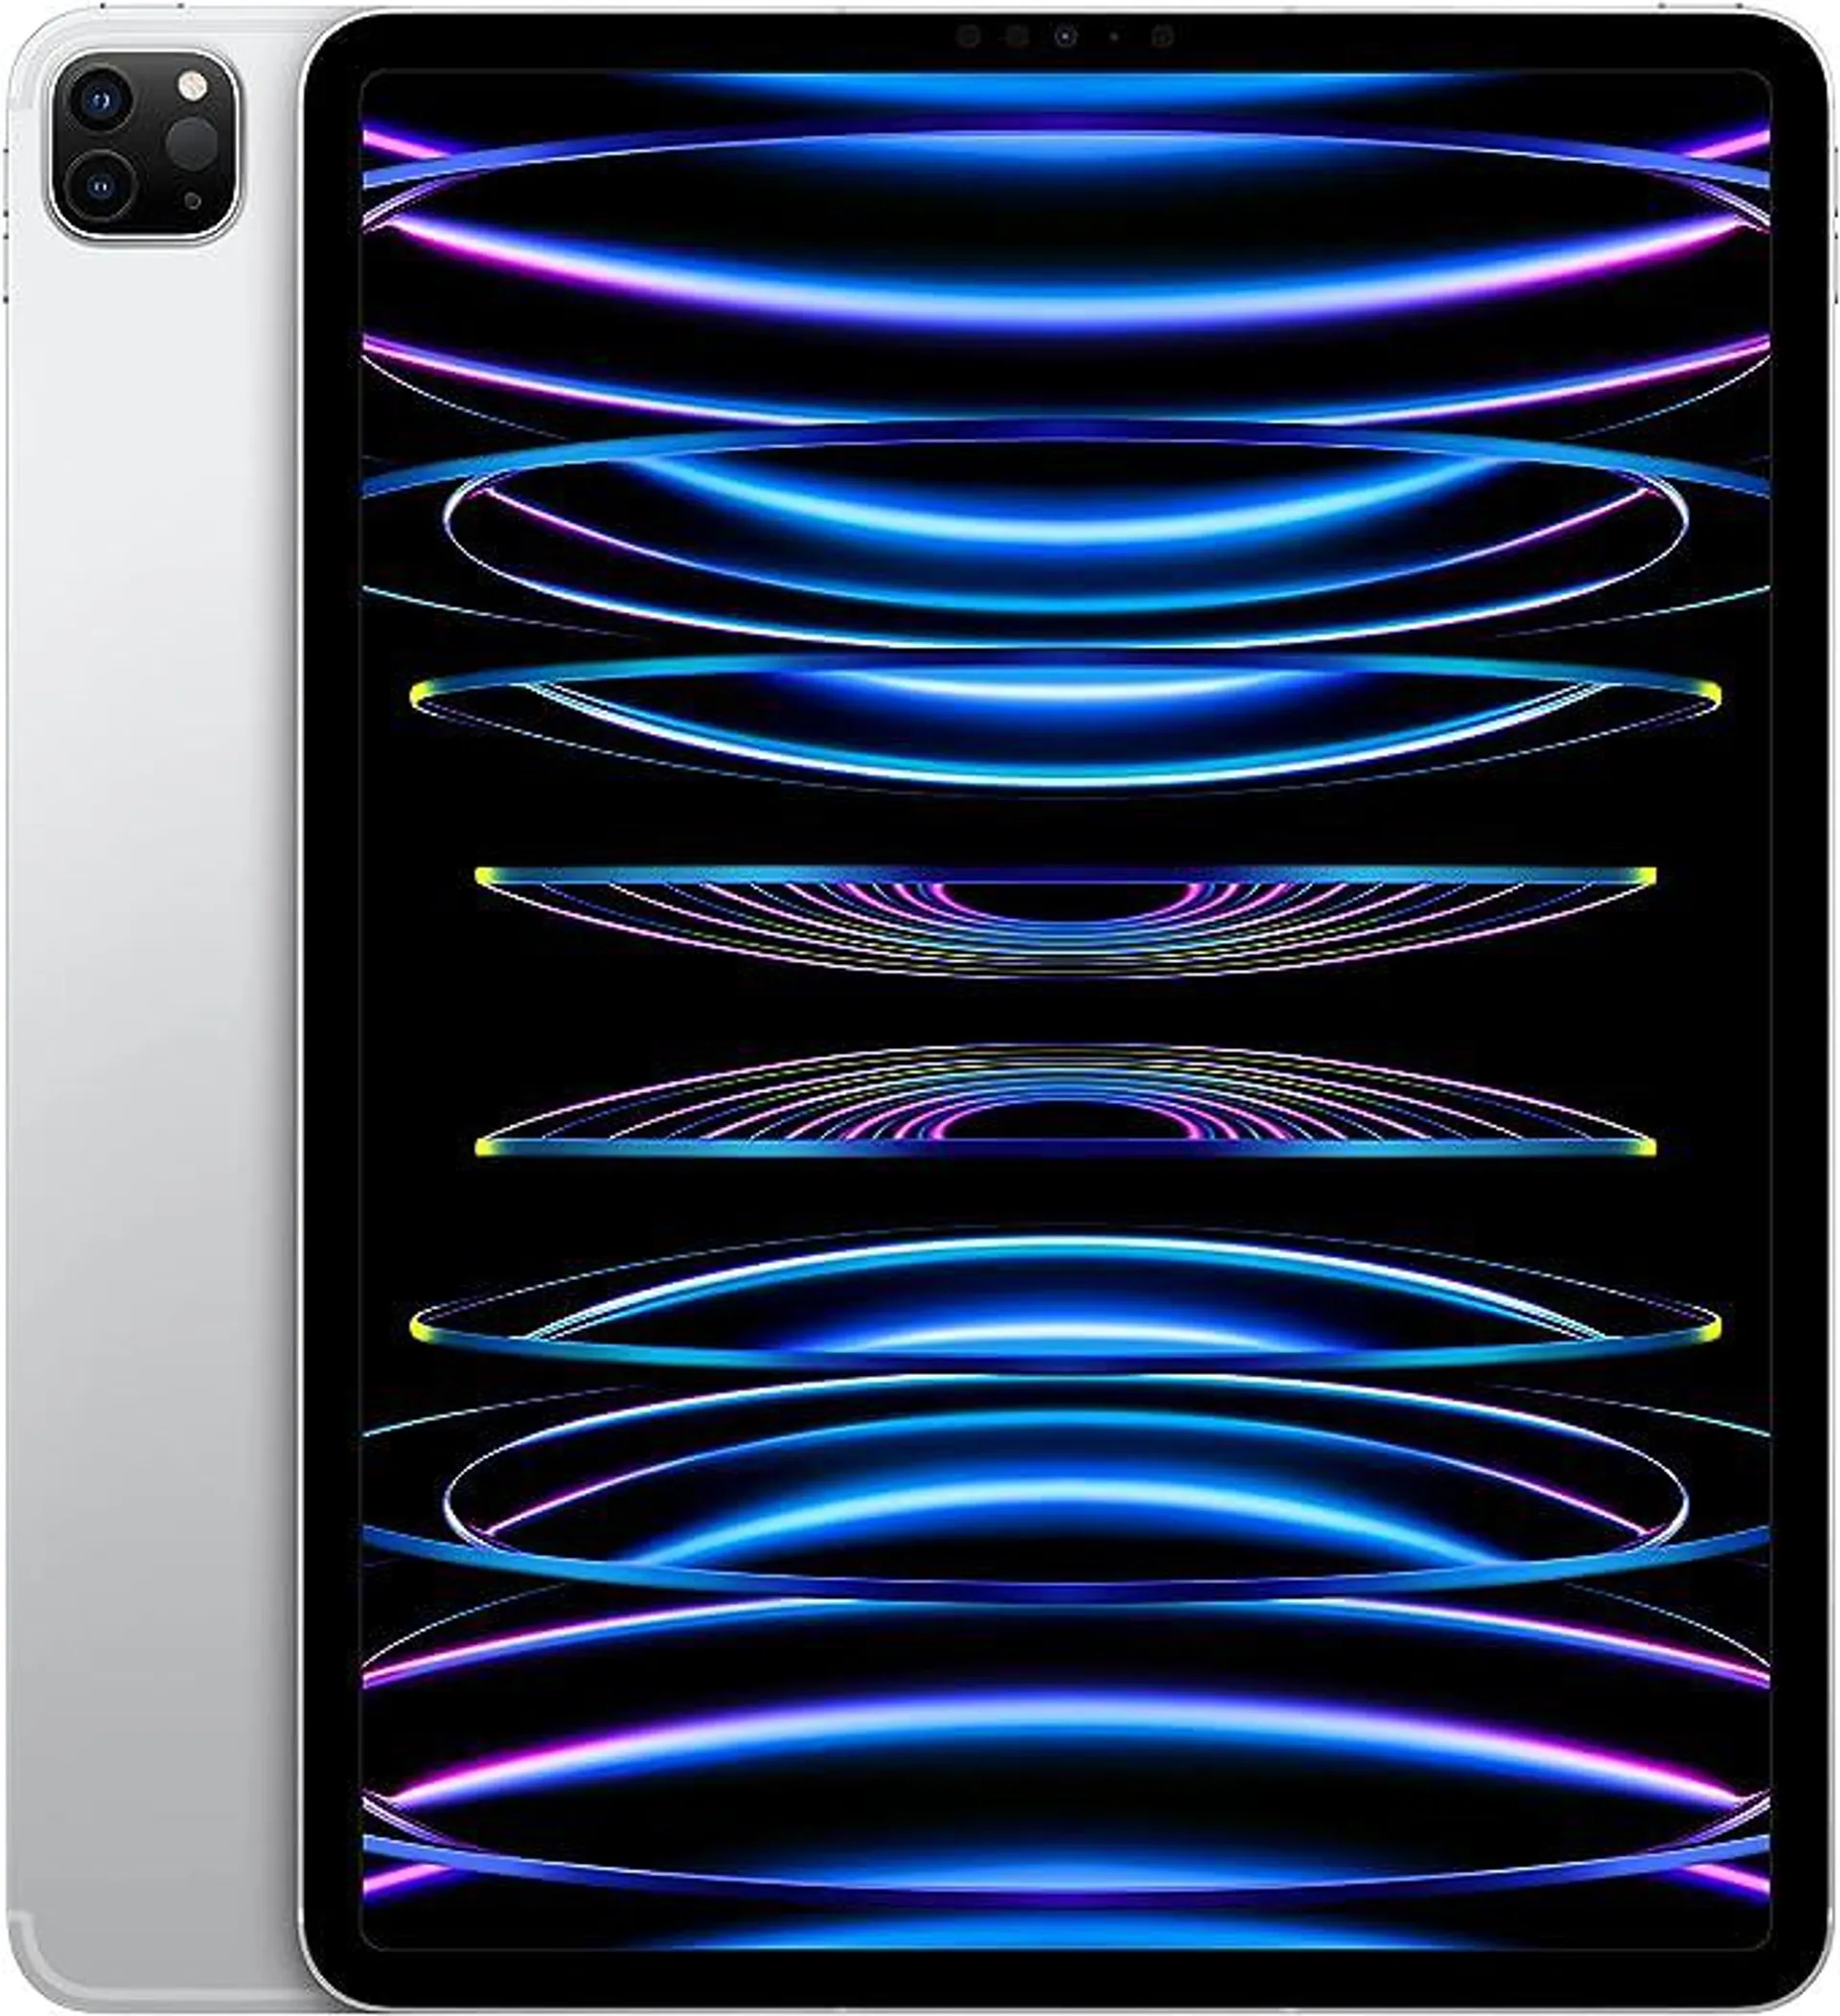 Apple iPad Pro 12.9-inch (6th Generation): with M2 chip, Liquid Retina XDR Display, 256GB, Wi-Fi 6E + 5G Cellular, 12MP front/12MP and 10MP Back Cameras, Face ID, All-Day Battery Life – Silver